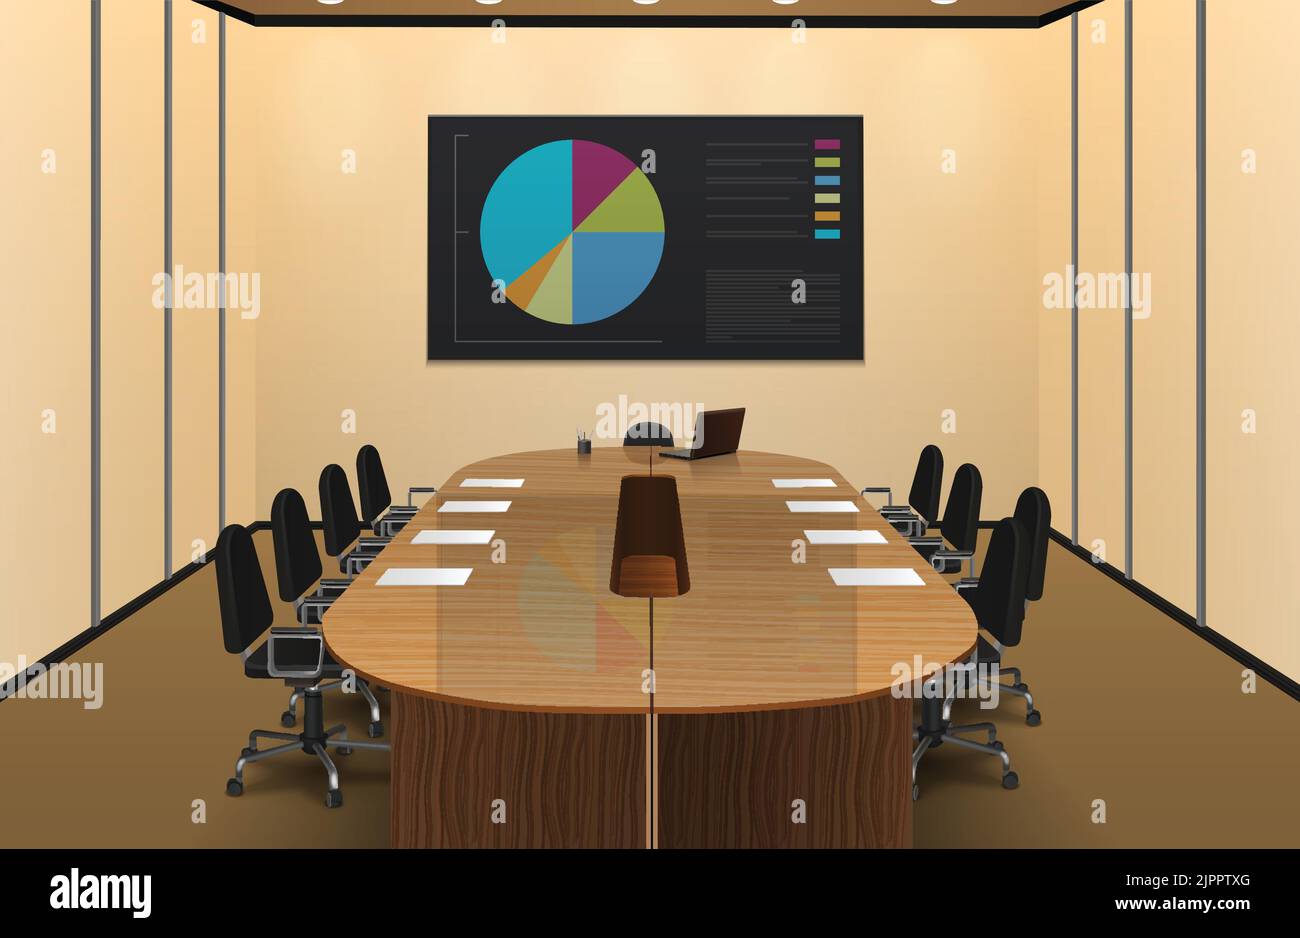 Conference room interior realistic design with chart on the screen vector illustration Stock Vector